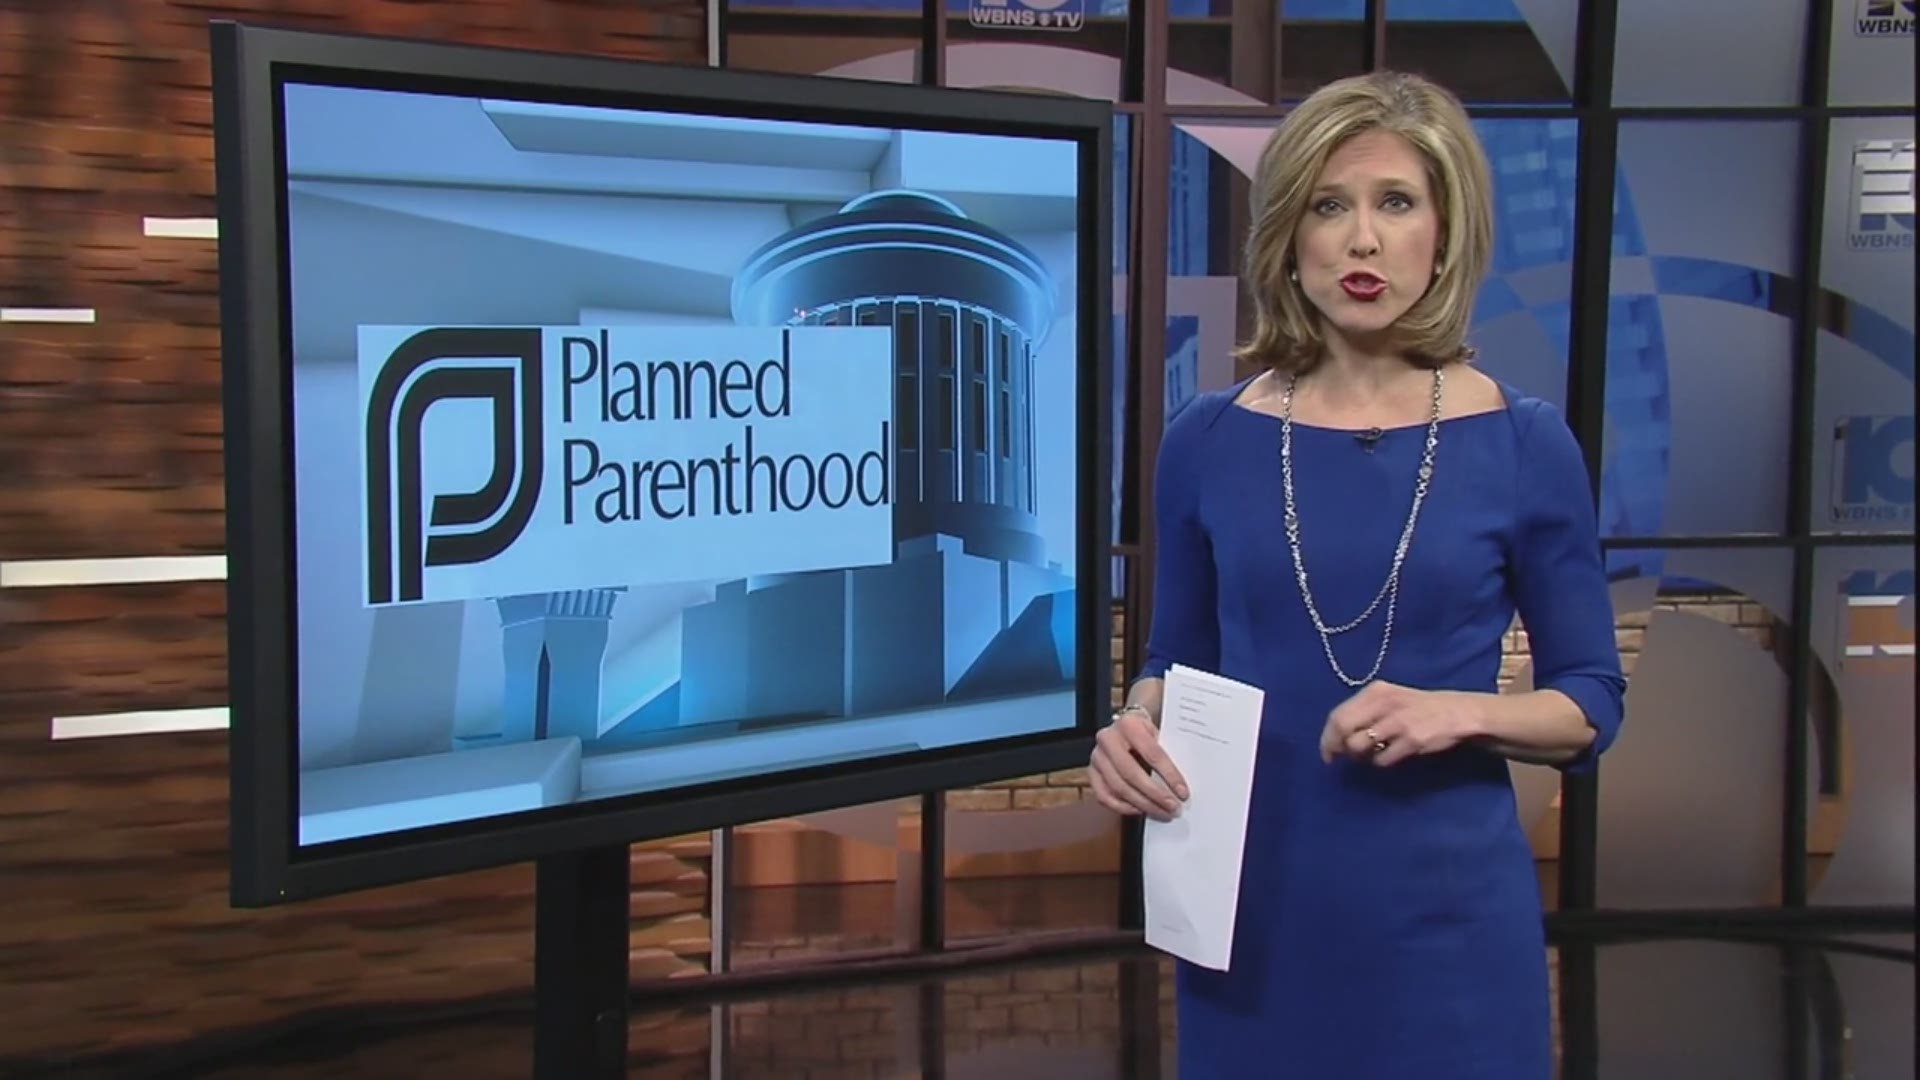 Ohio Health Officials Worried About Possible Planned Parenthood Defunding